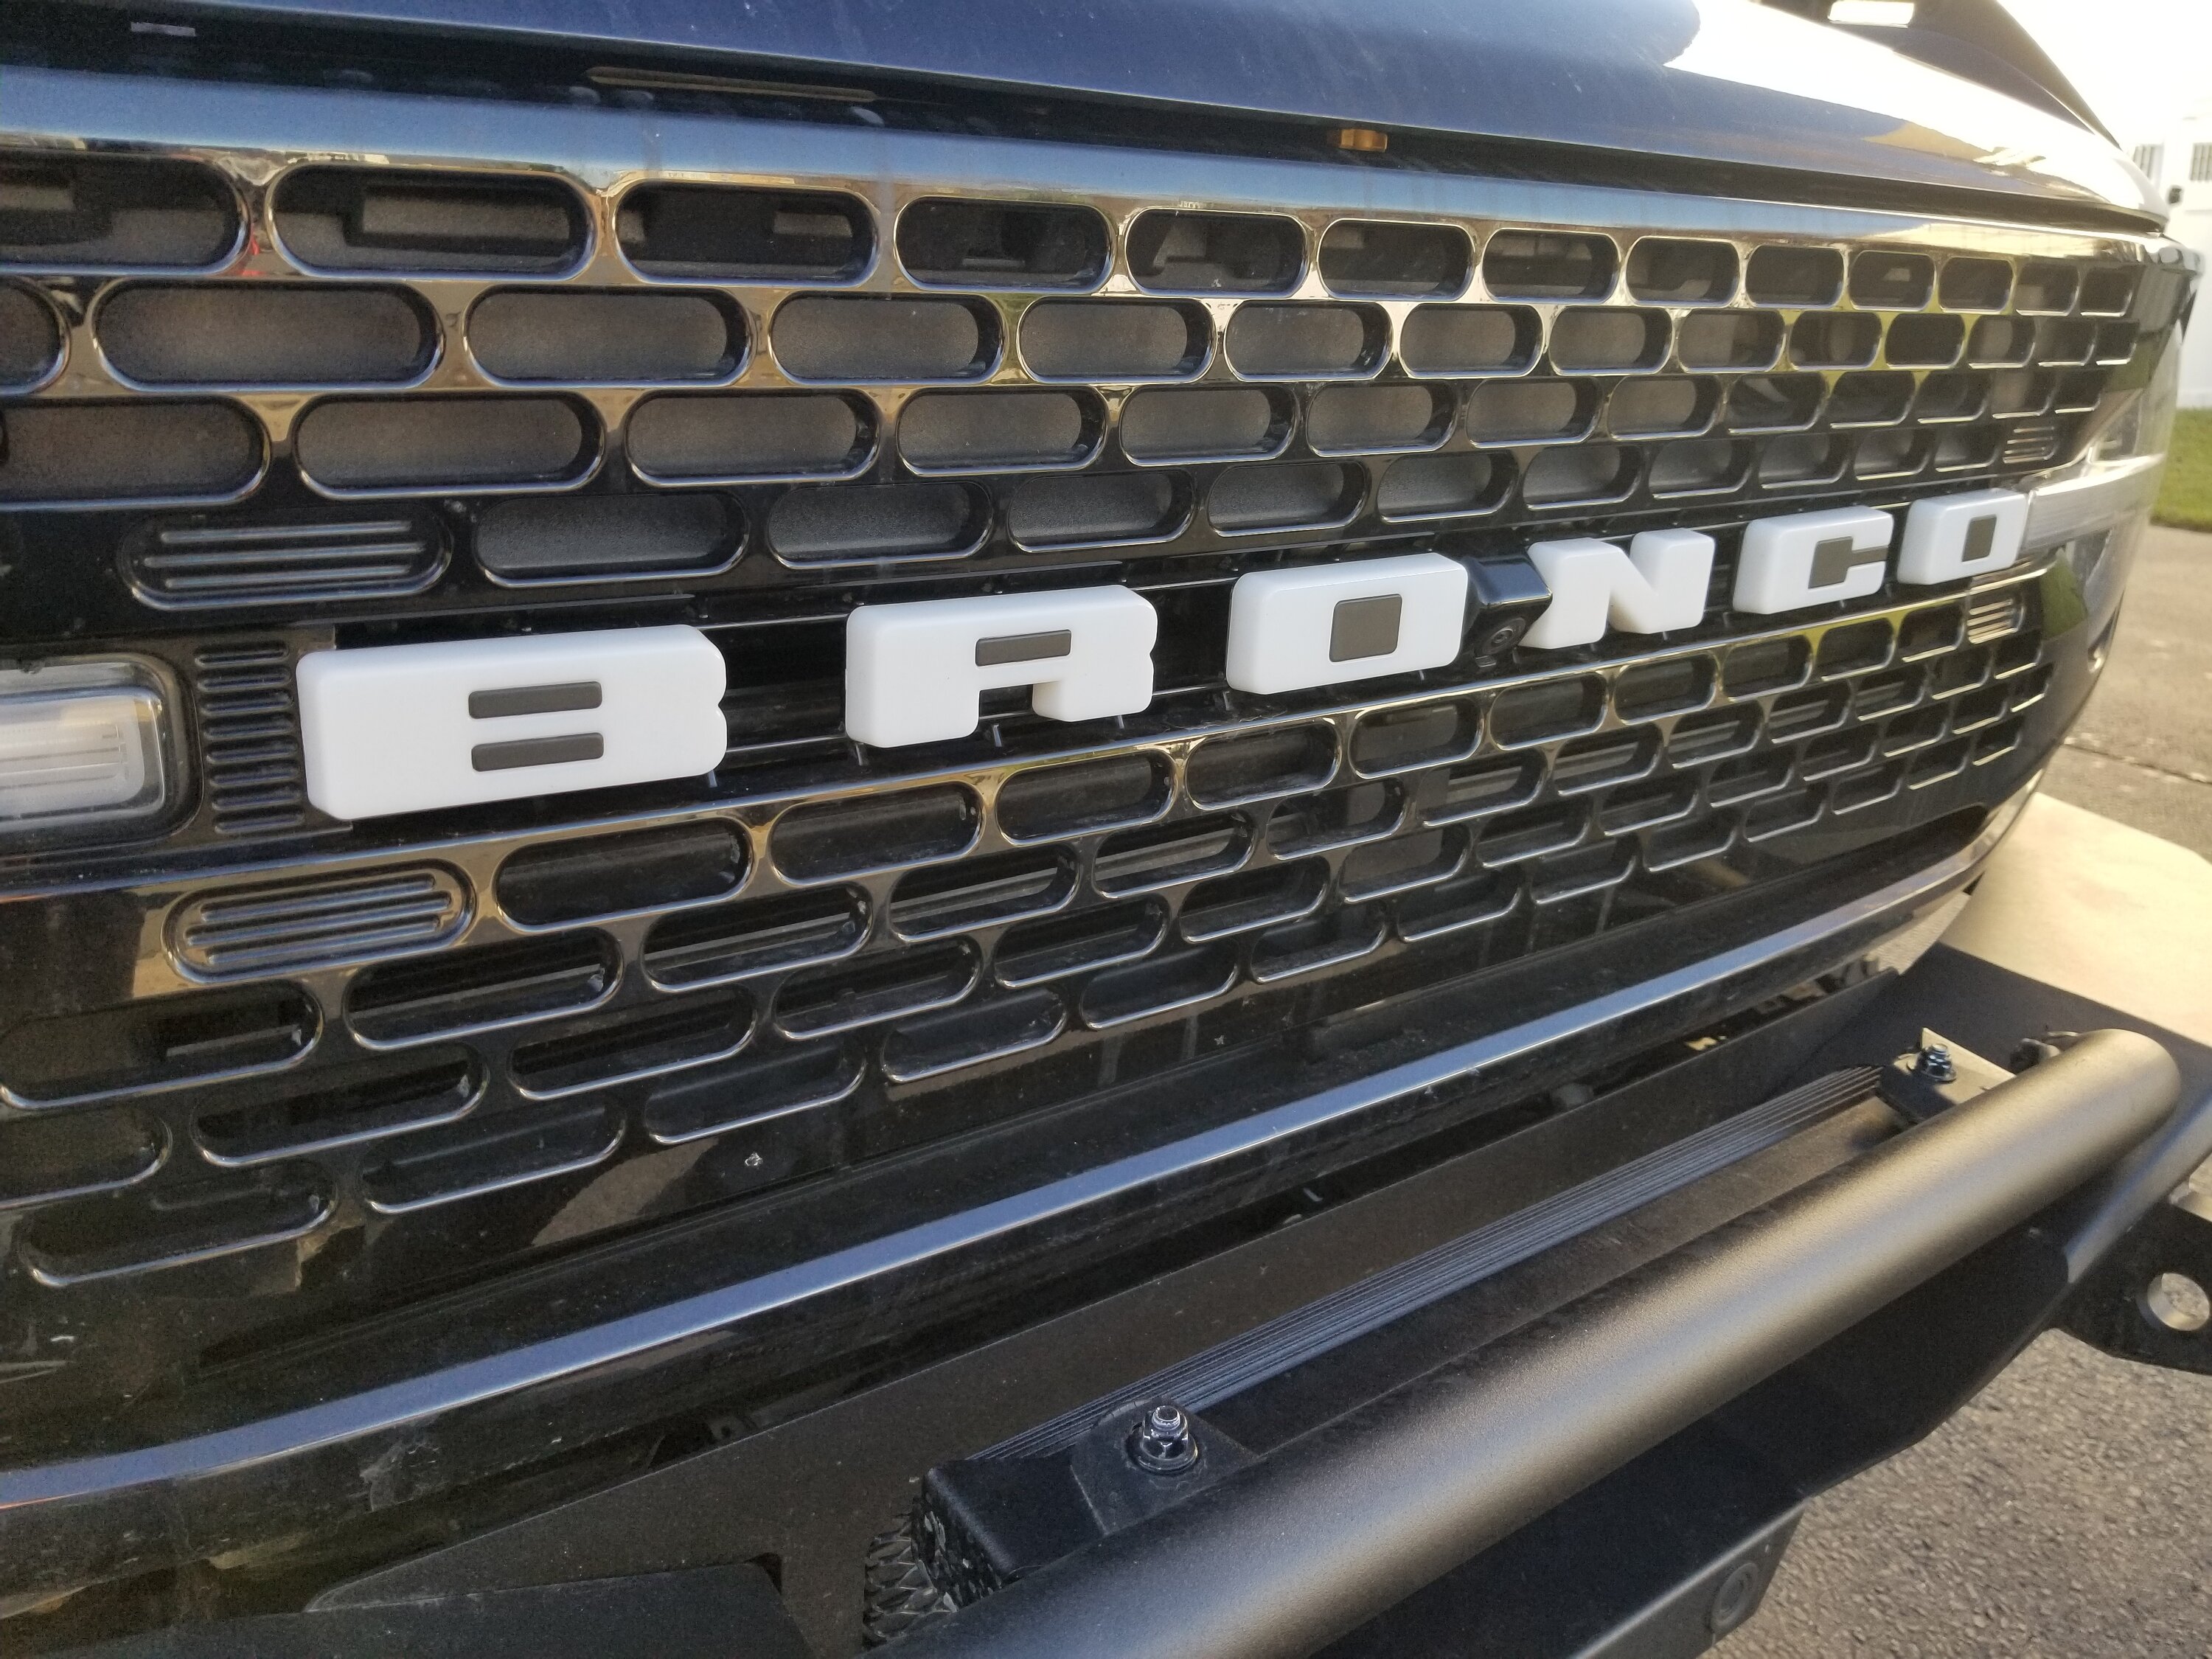 Bronco Oracle Backlit Grill Letters Replaced 20221213_142619